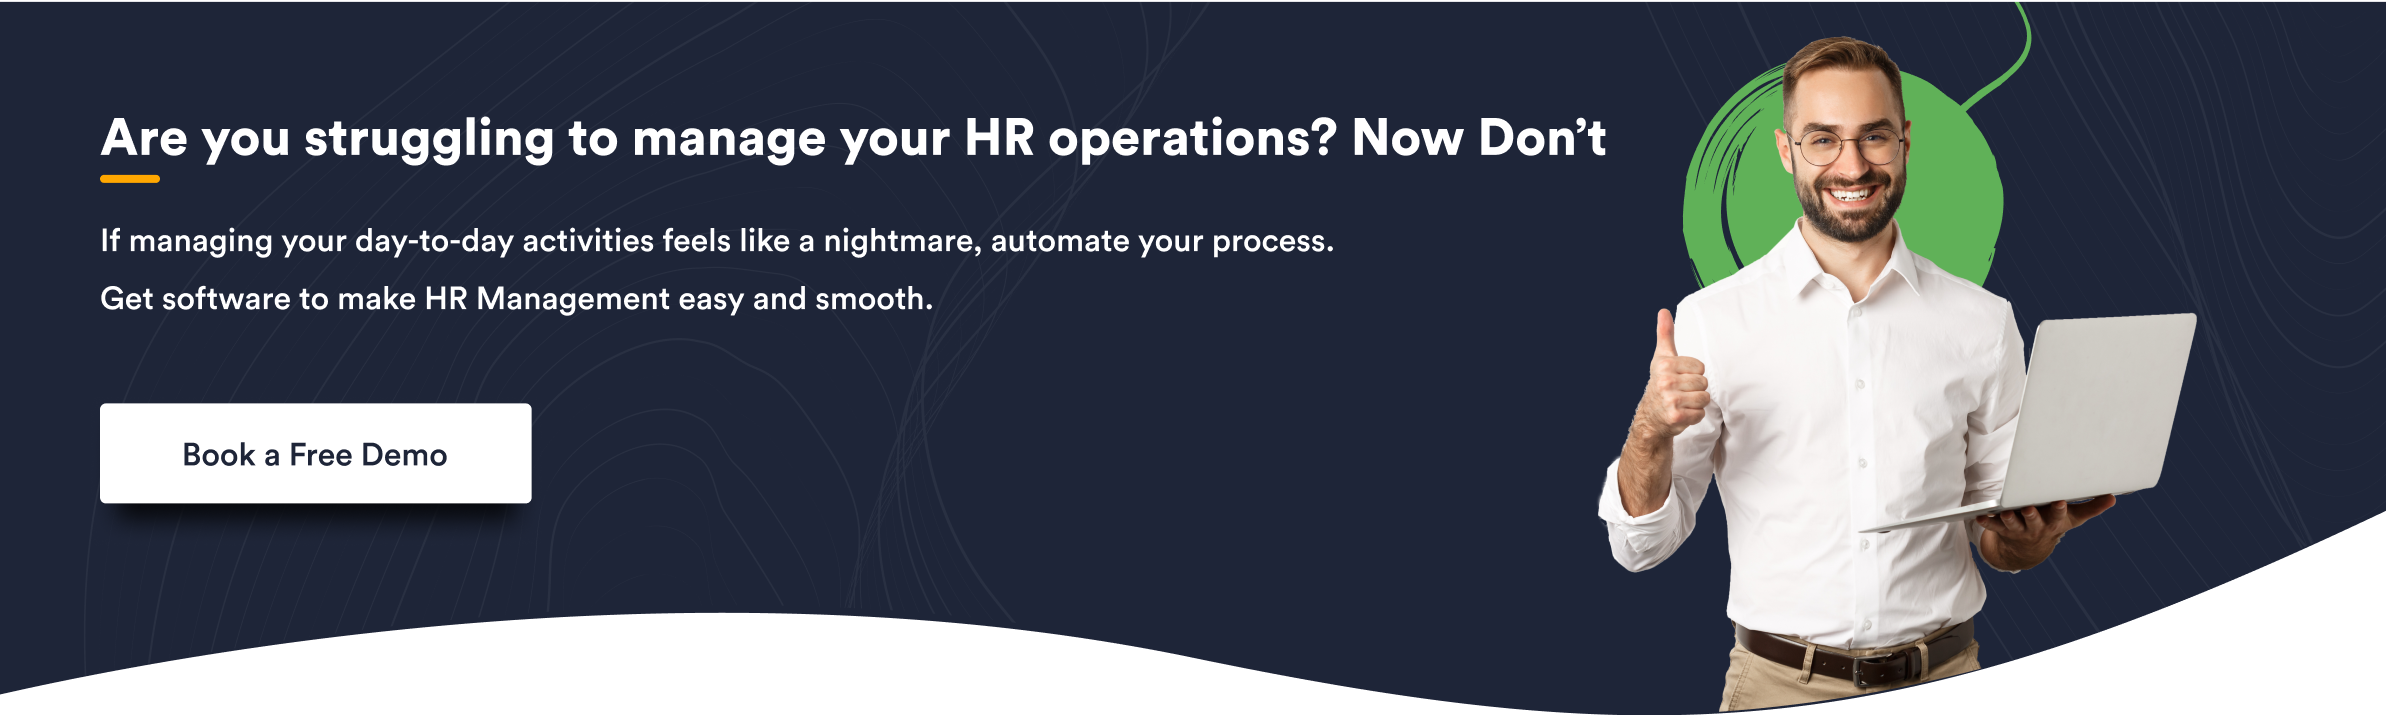 Are you struggling to manage your HR operations